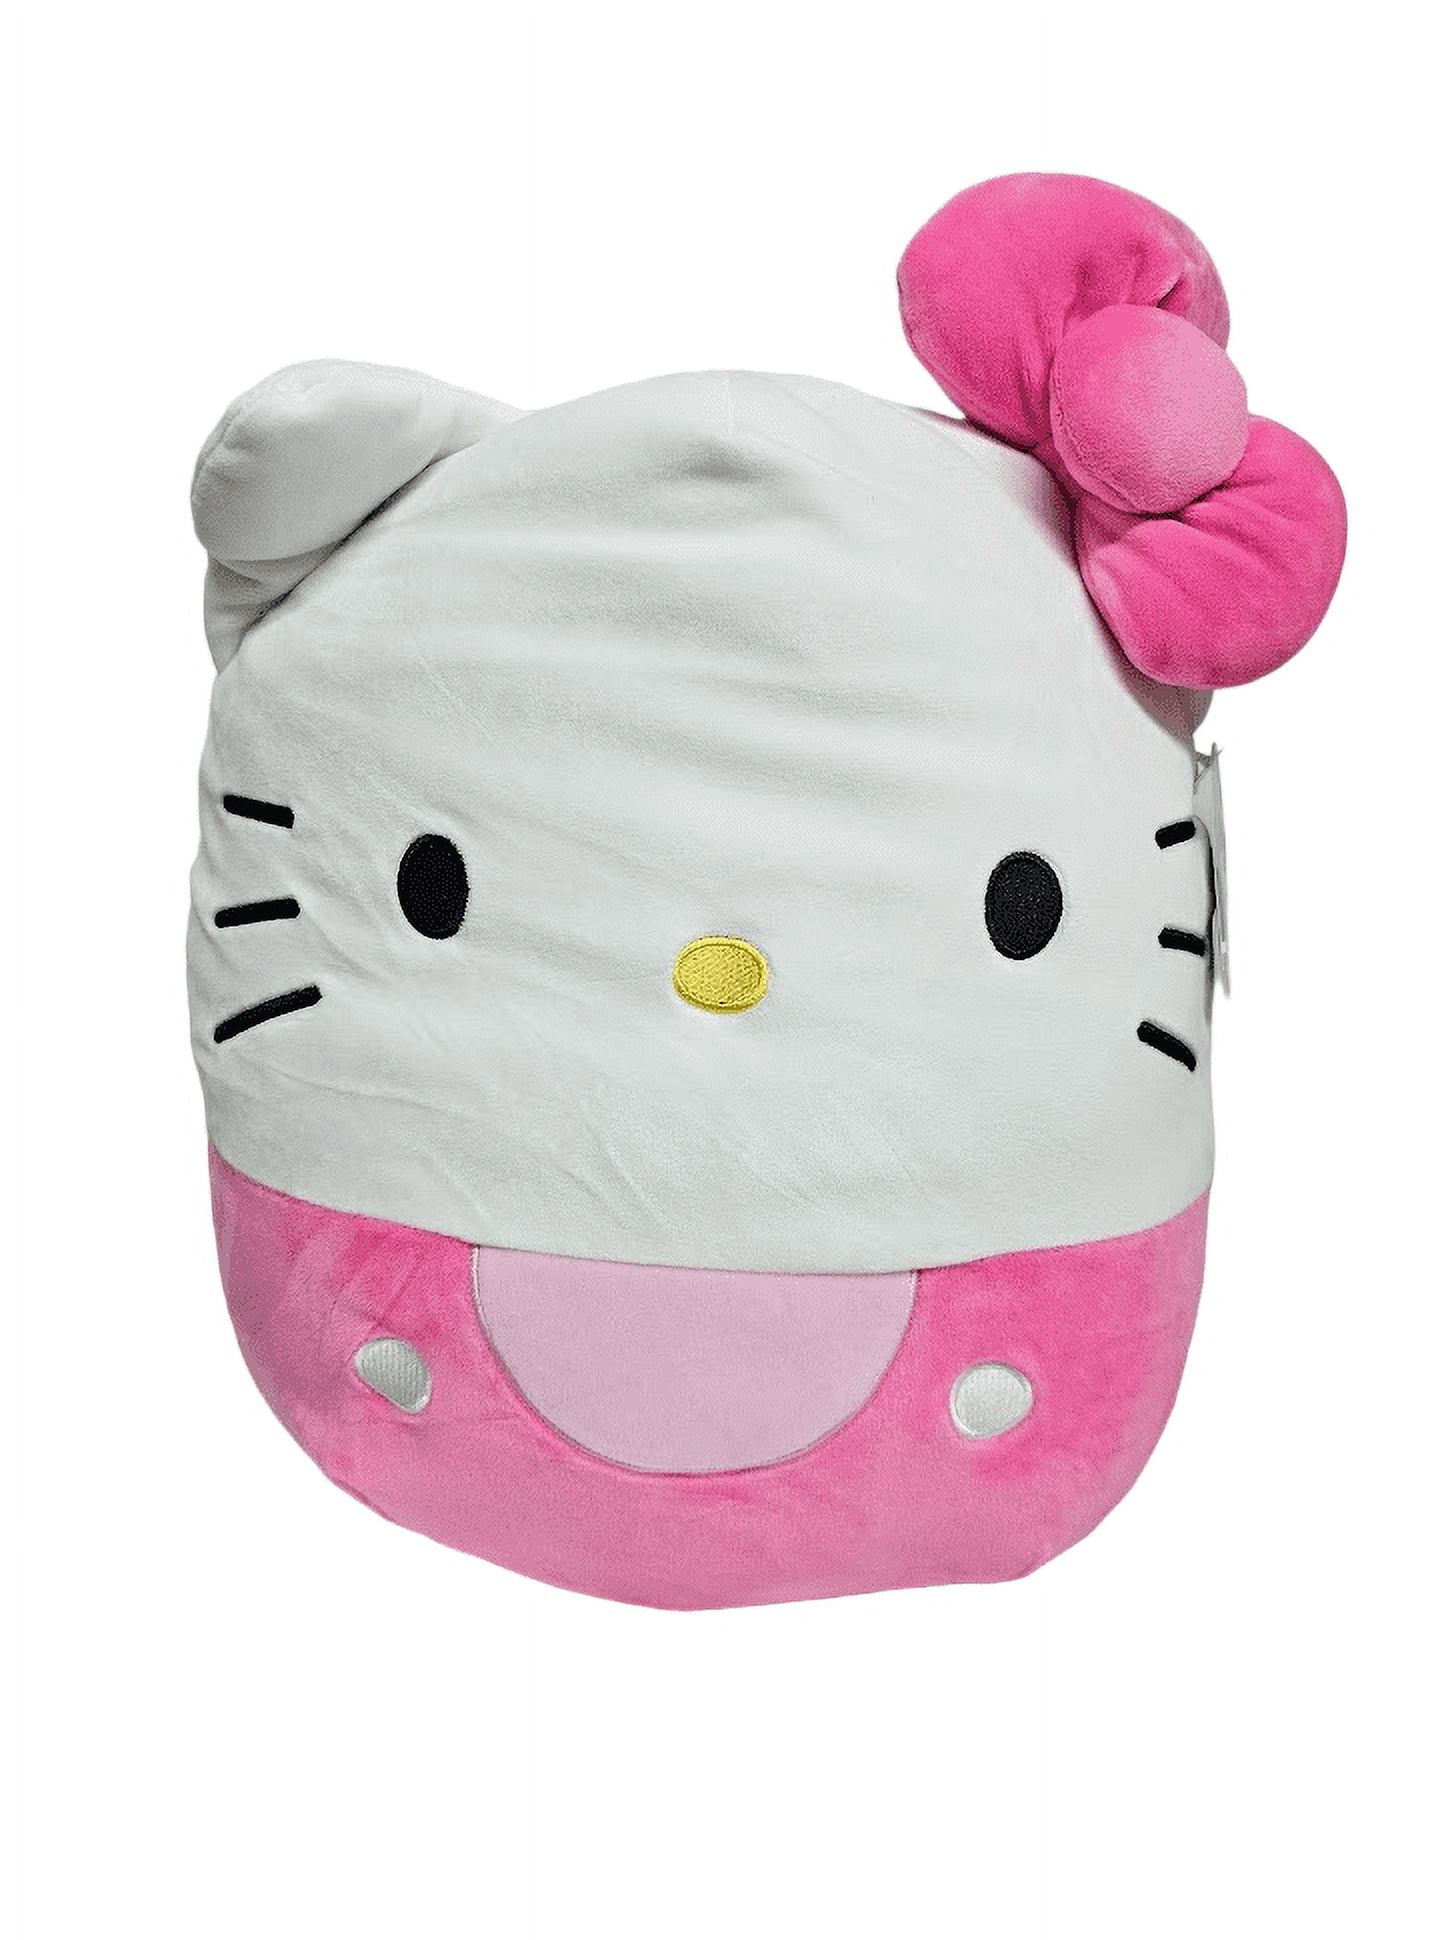  Squishmallows Hello Kitty Pink Bow & Shorts 14-Inch - Sanrio  Ultrasoft Stuffed Animal Large Plush Toy, Official Kellytoy : Toys & Games